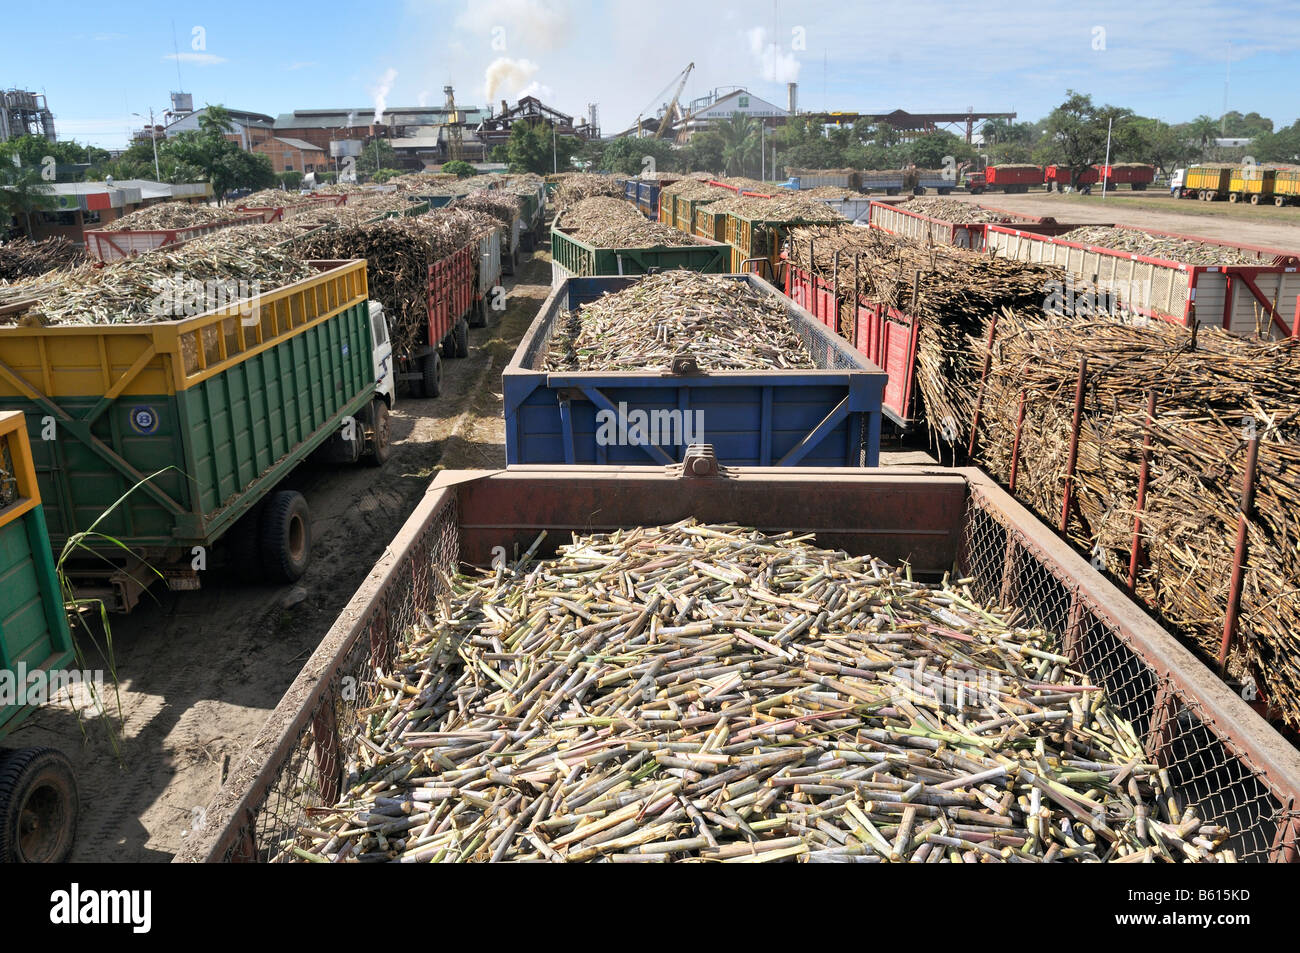 Trucks loaded with sugar cane outside a factory, used to produce ethanol and biodiesel, Montero, Santa Cruz, Bolivia Stock Photo